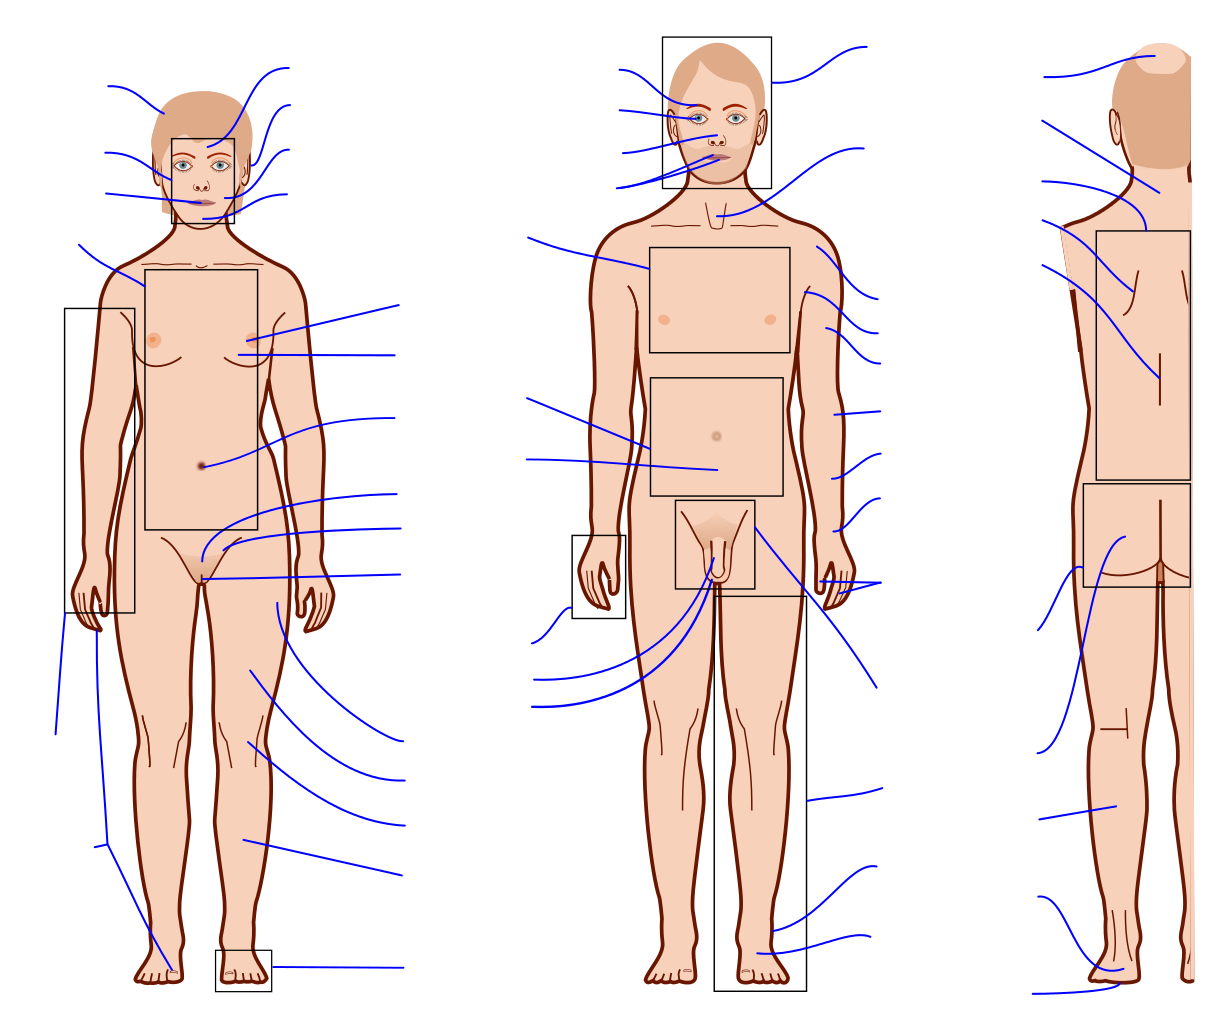 https://upload.wikimedia.org/wikipedia/commons/thumb/5/5d/Human_body_features_with_blank_labels.svg/1228px-Human_body_features_with_blank_labels.svg.png